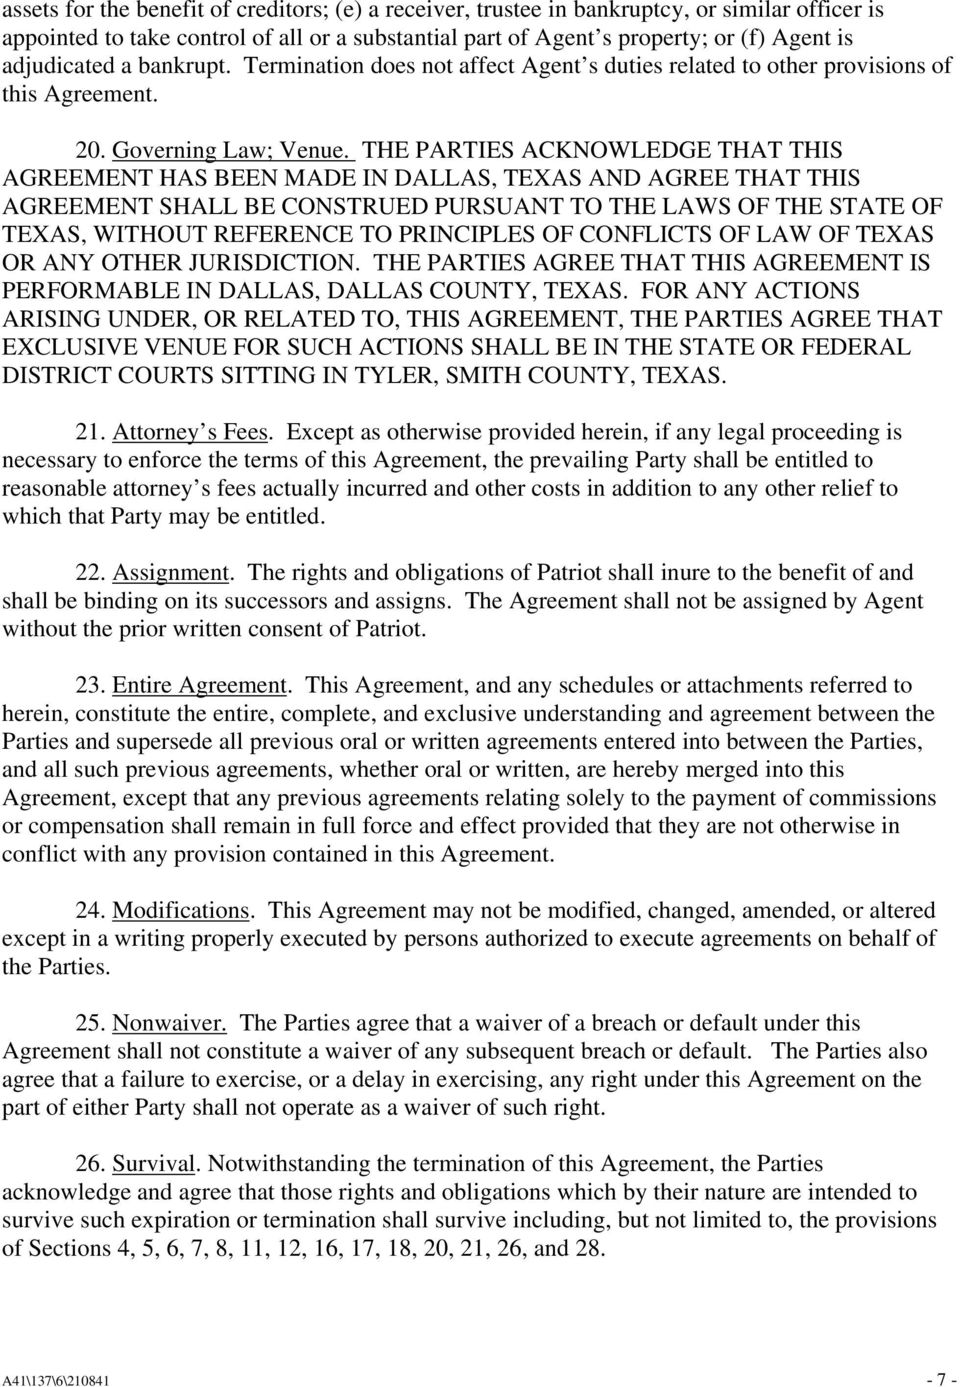 THE PARTIES ACKNOWLEDGE THAT THIS AGREEMENT HAS BEEN MADE IN DALLAS, TEXAS AND AGREE THAT THIS AGREEMENT SHALL BE CONSTRUED PURSUANT TO THE LAWS OF THE STATE OF TEXAS, WITHOUT REFERENCE TO PRINCIPLES